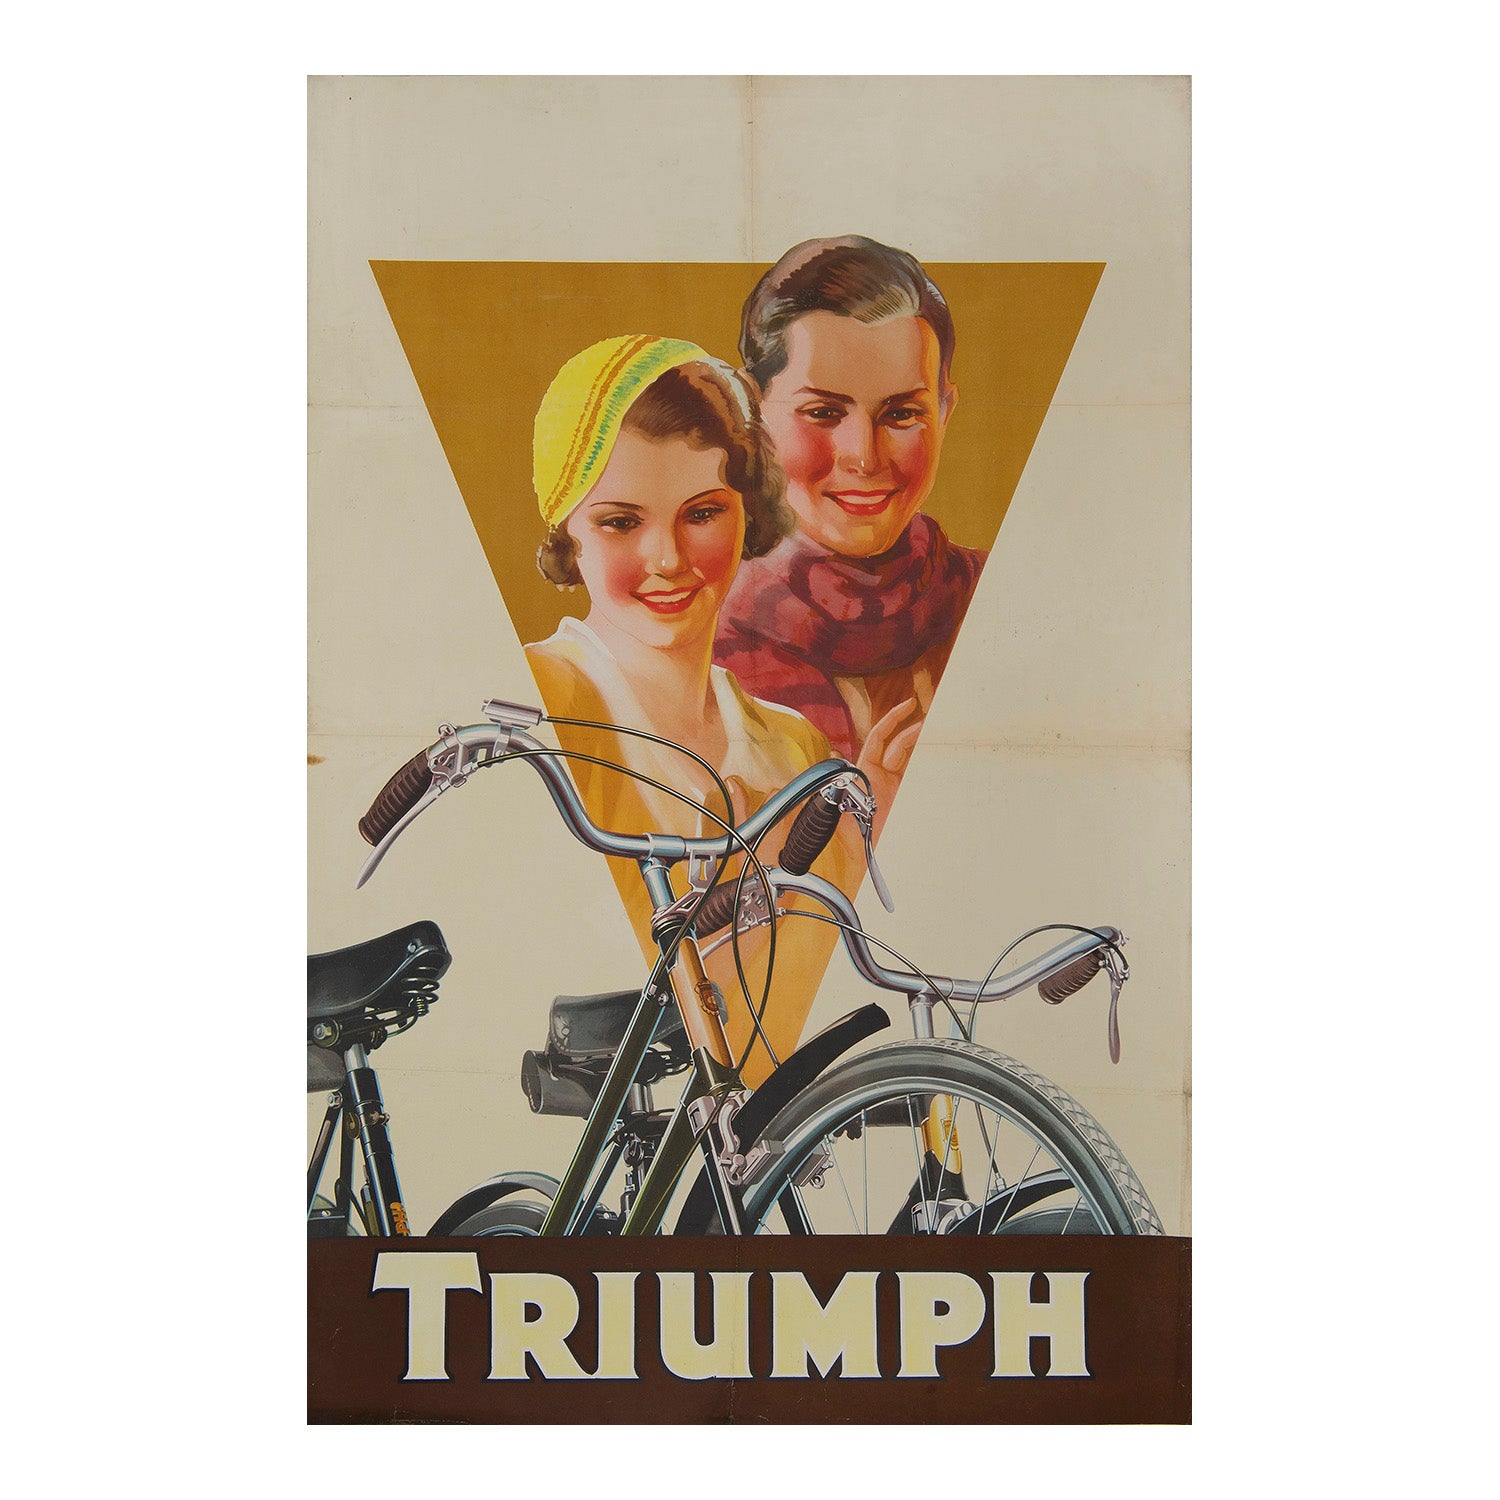 An original promotional poster for the world-famous Triumph Cycle Company, c. 1935. The stylish design links the aspirations of the young couple with two new bicycles via an inverted triangle.